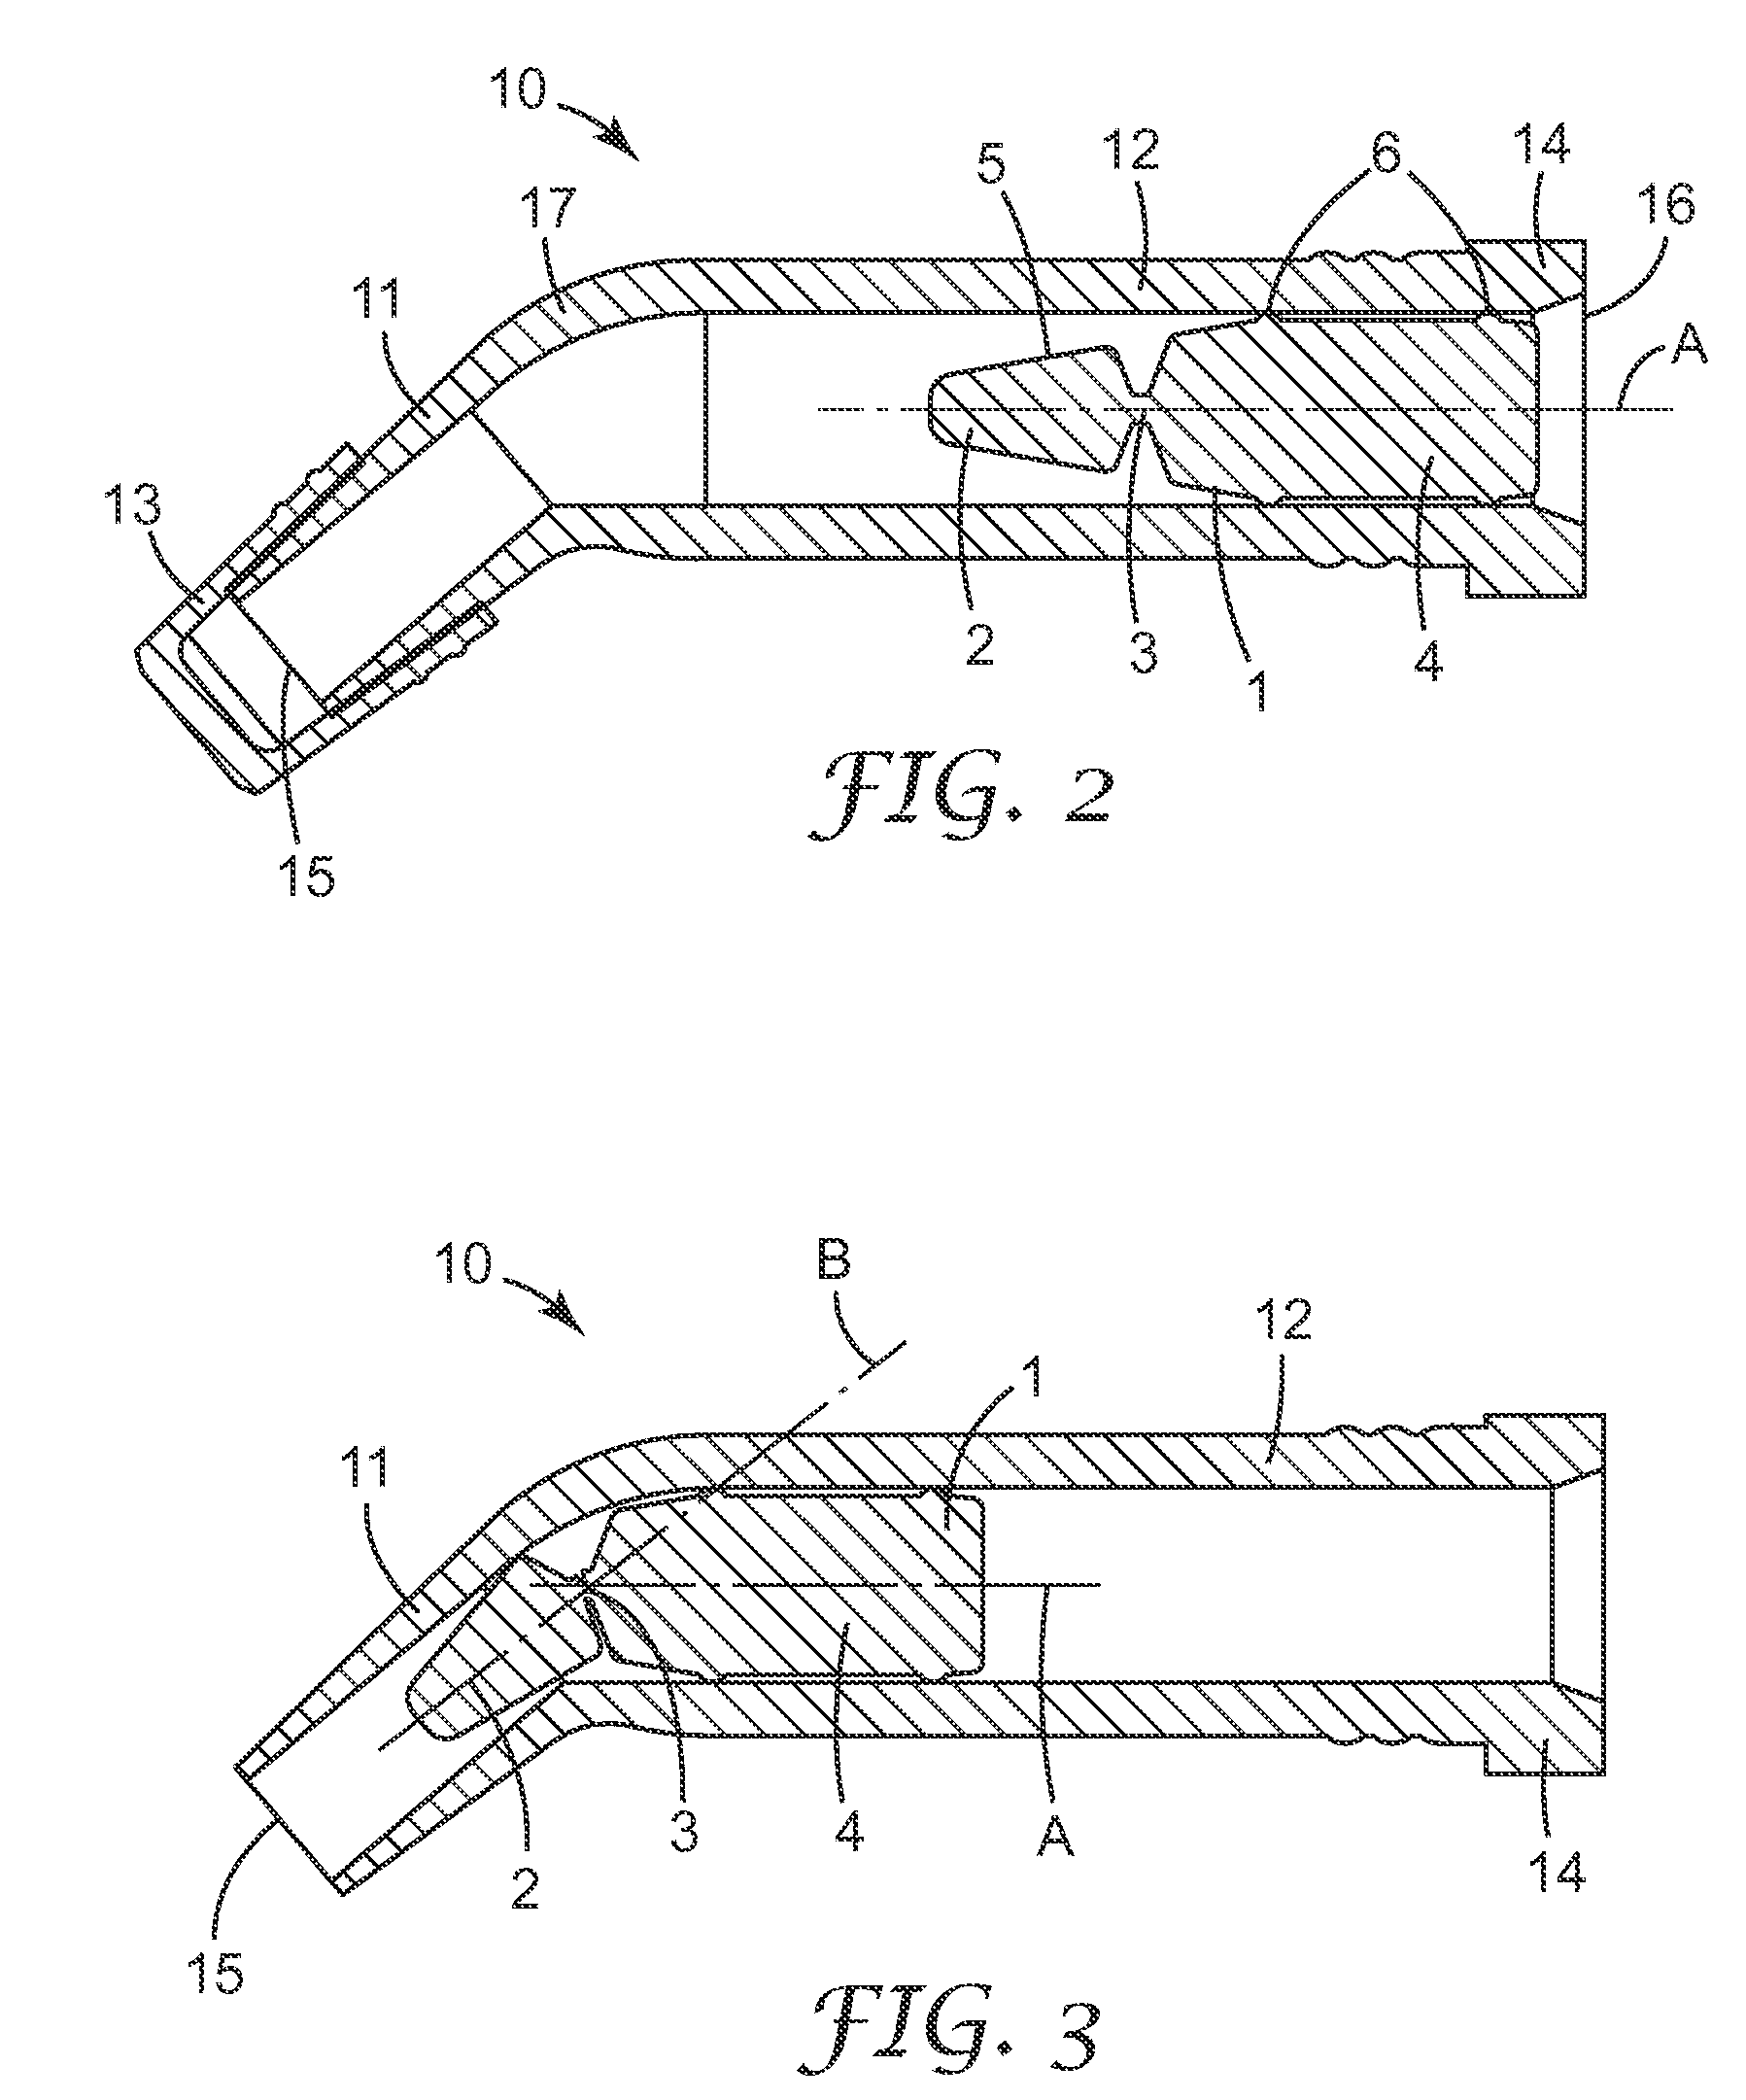 Piston for capsule, method of forming such piston, and capsule therewith